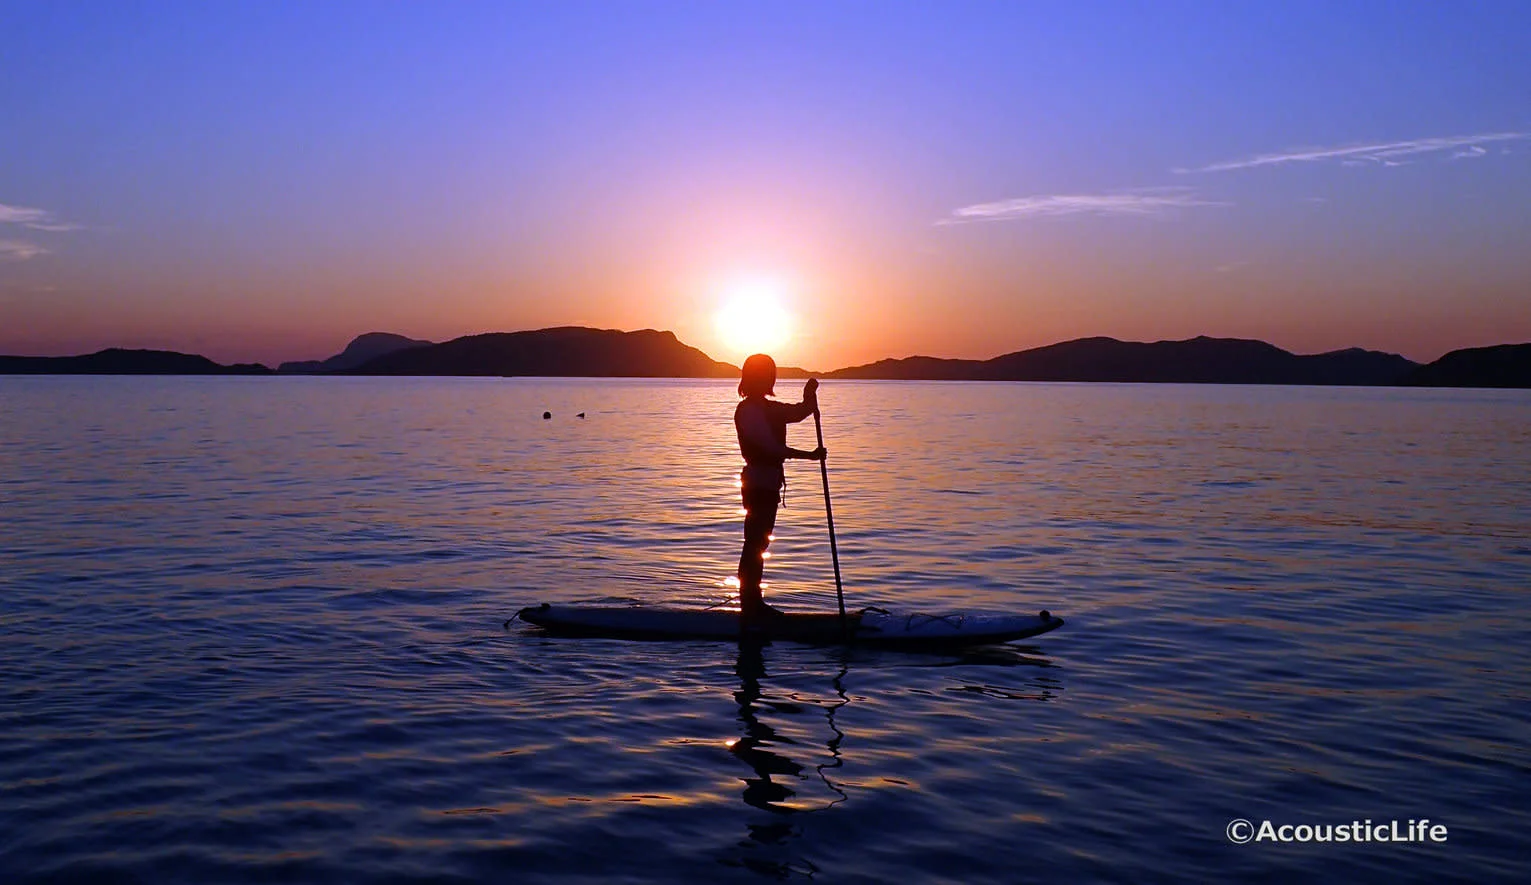 SUP Boarding to a Spectacular Sunset in Kerama Blue Lagoon